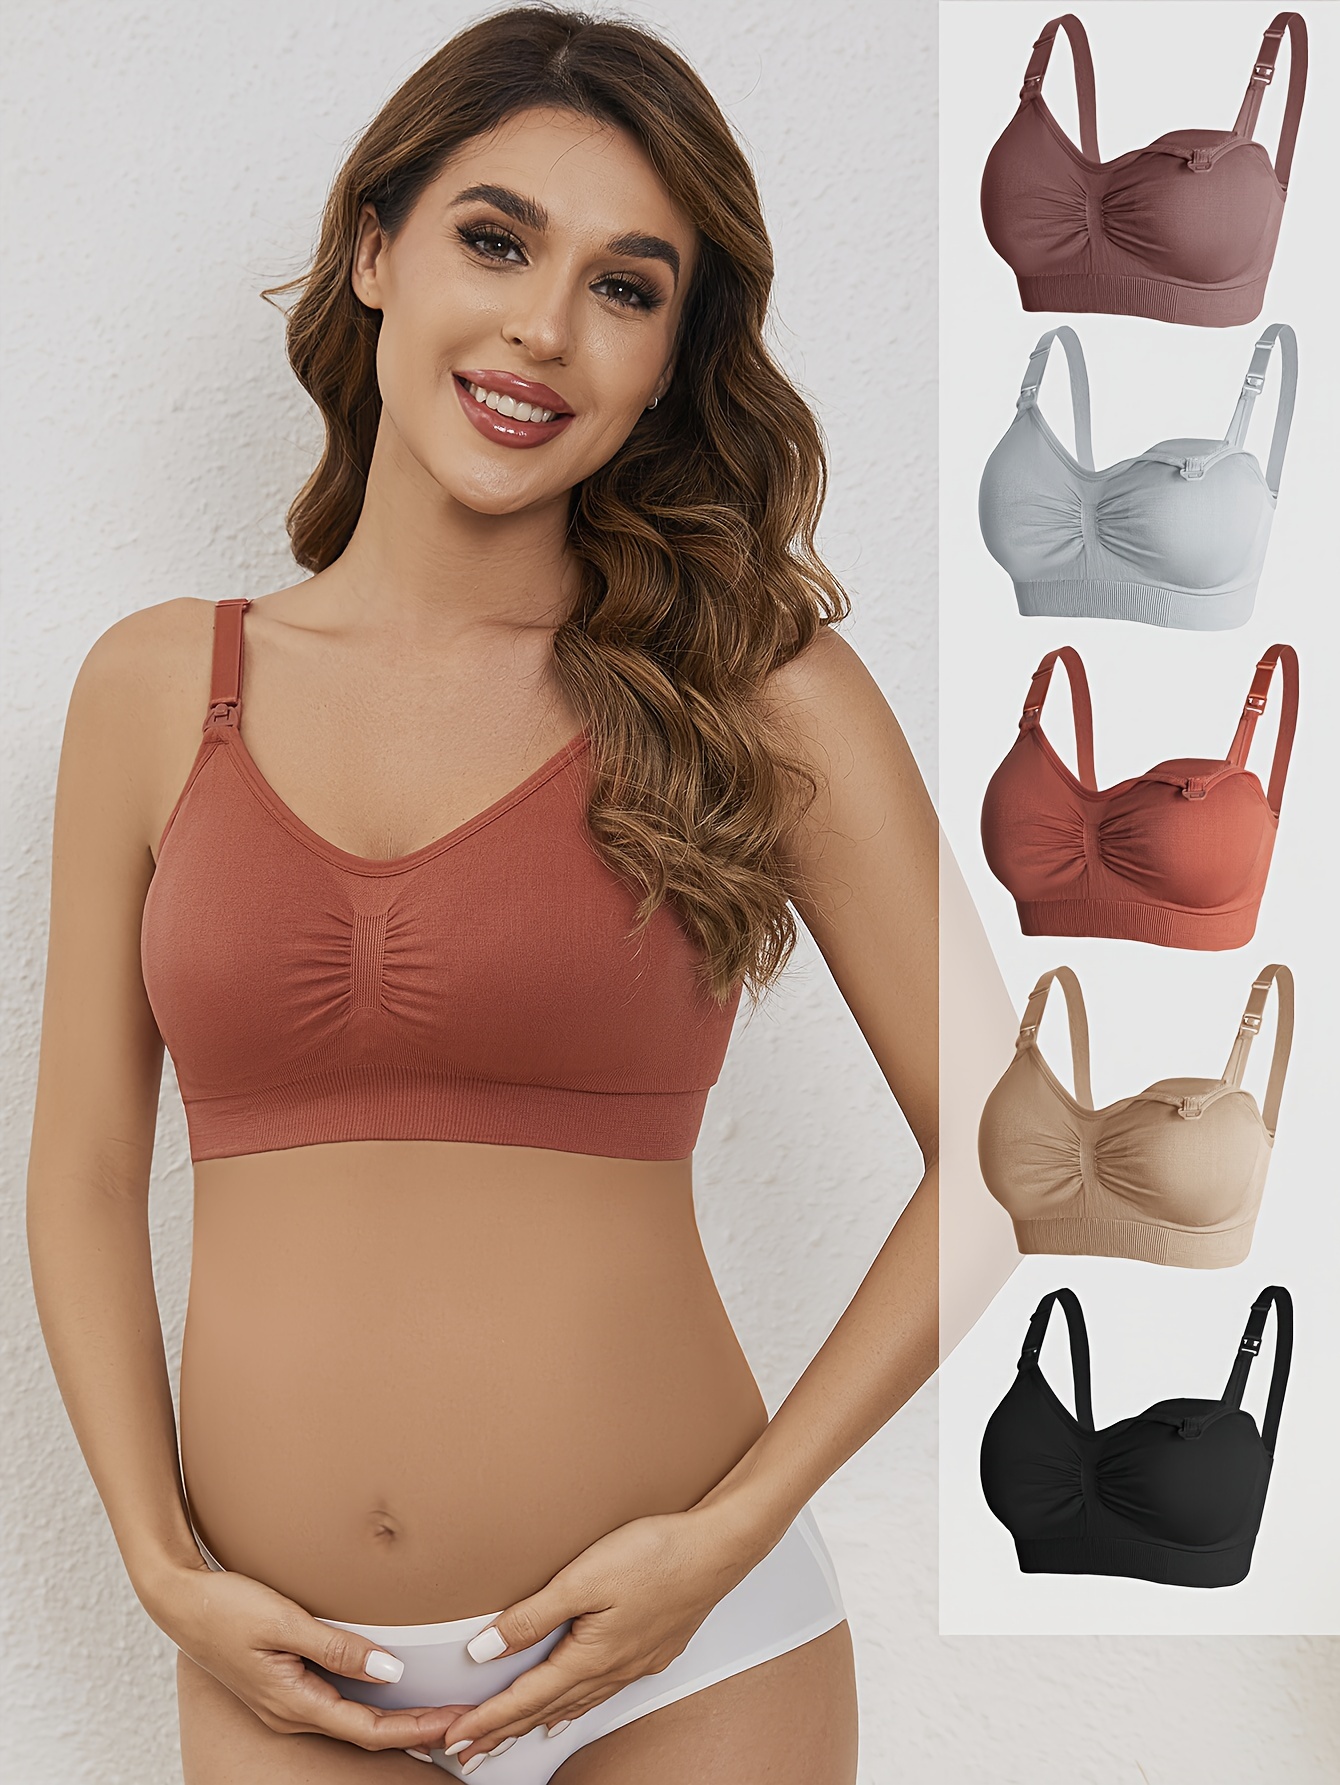  G - Nursing & Maternity Bras / Maternity Lingerie & Underwear:  Clothing, Shoes & Accessories